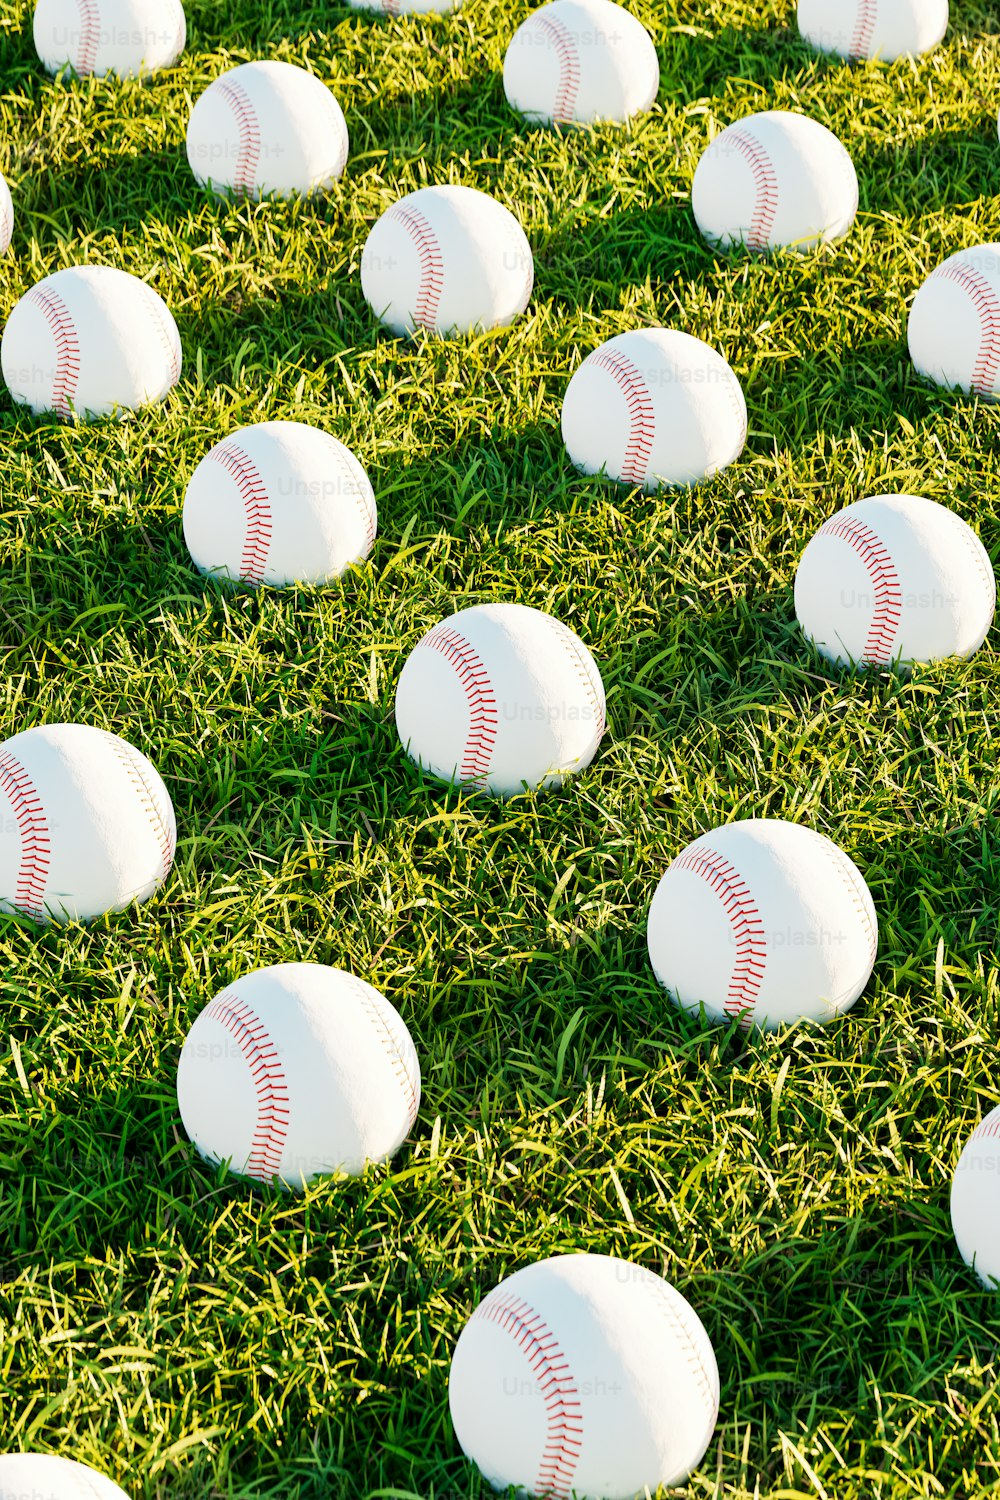 a field full of white baseballs laying on top of green grass